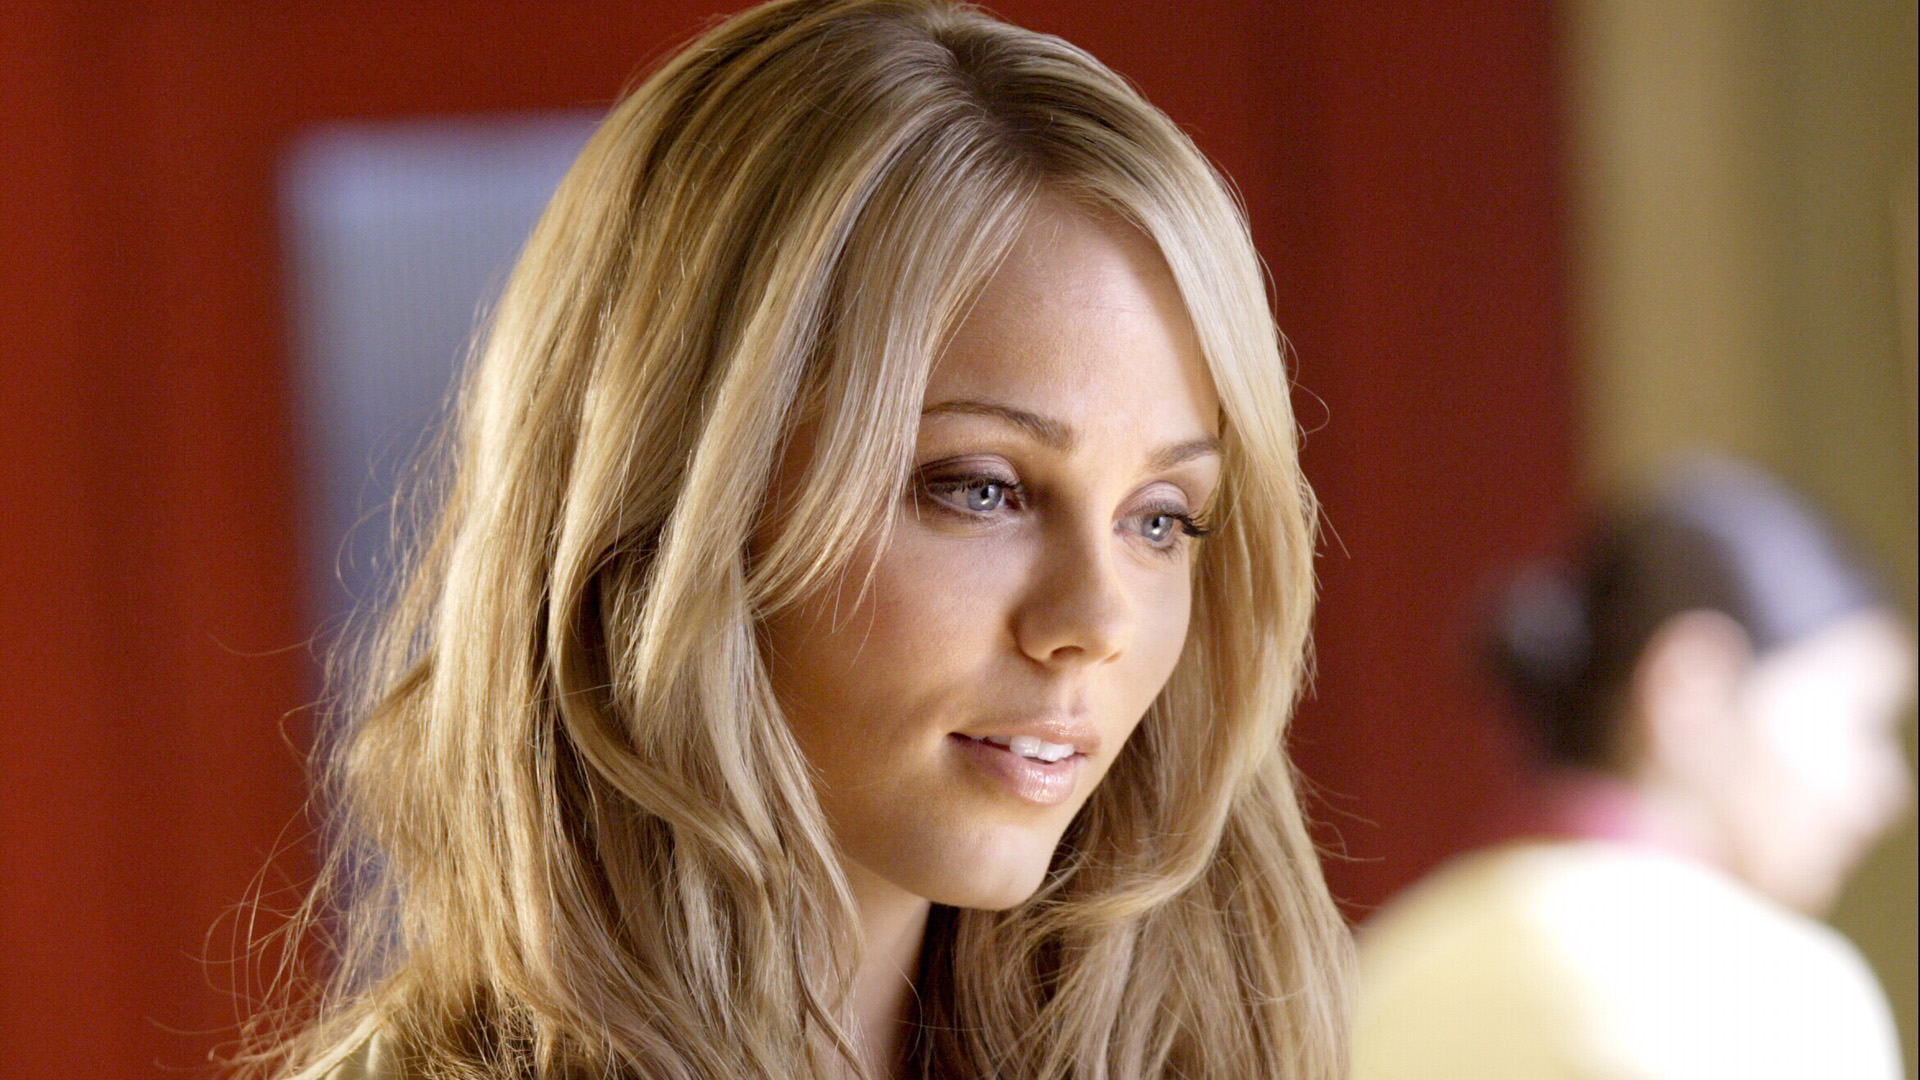 Laura Vandervoort 1 Arena Pile Top 10 Hottest Canadian Actresses In The World